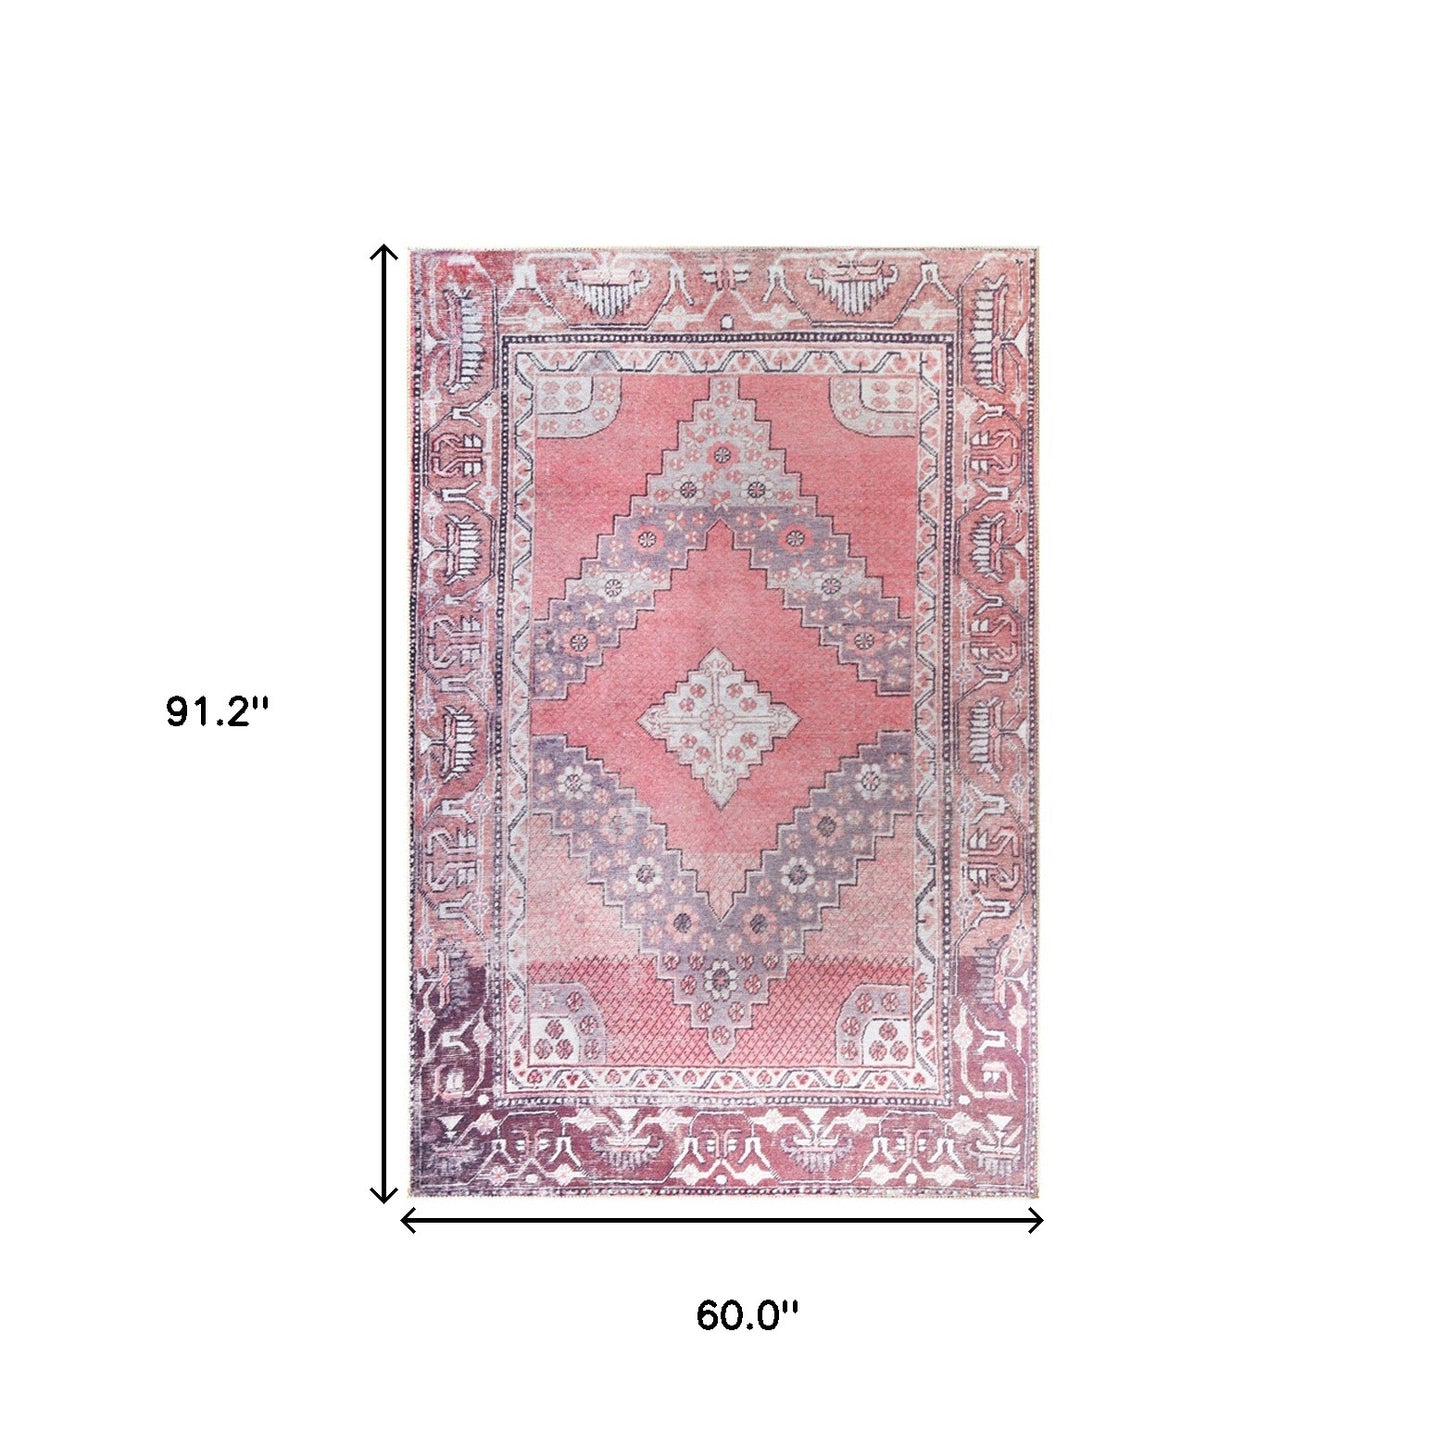 5' X 8' Pink Geometric Power Loom Distressed Stain Resistant Non Skid Area Rug